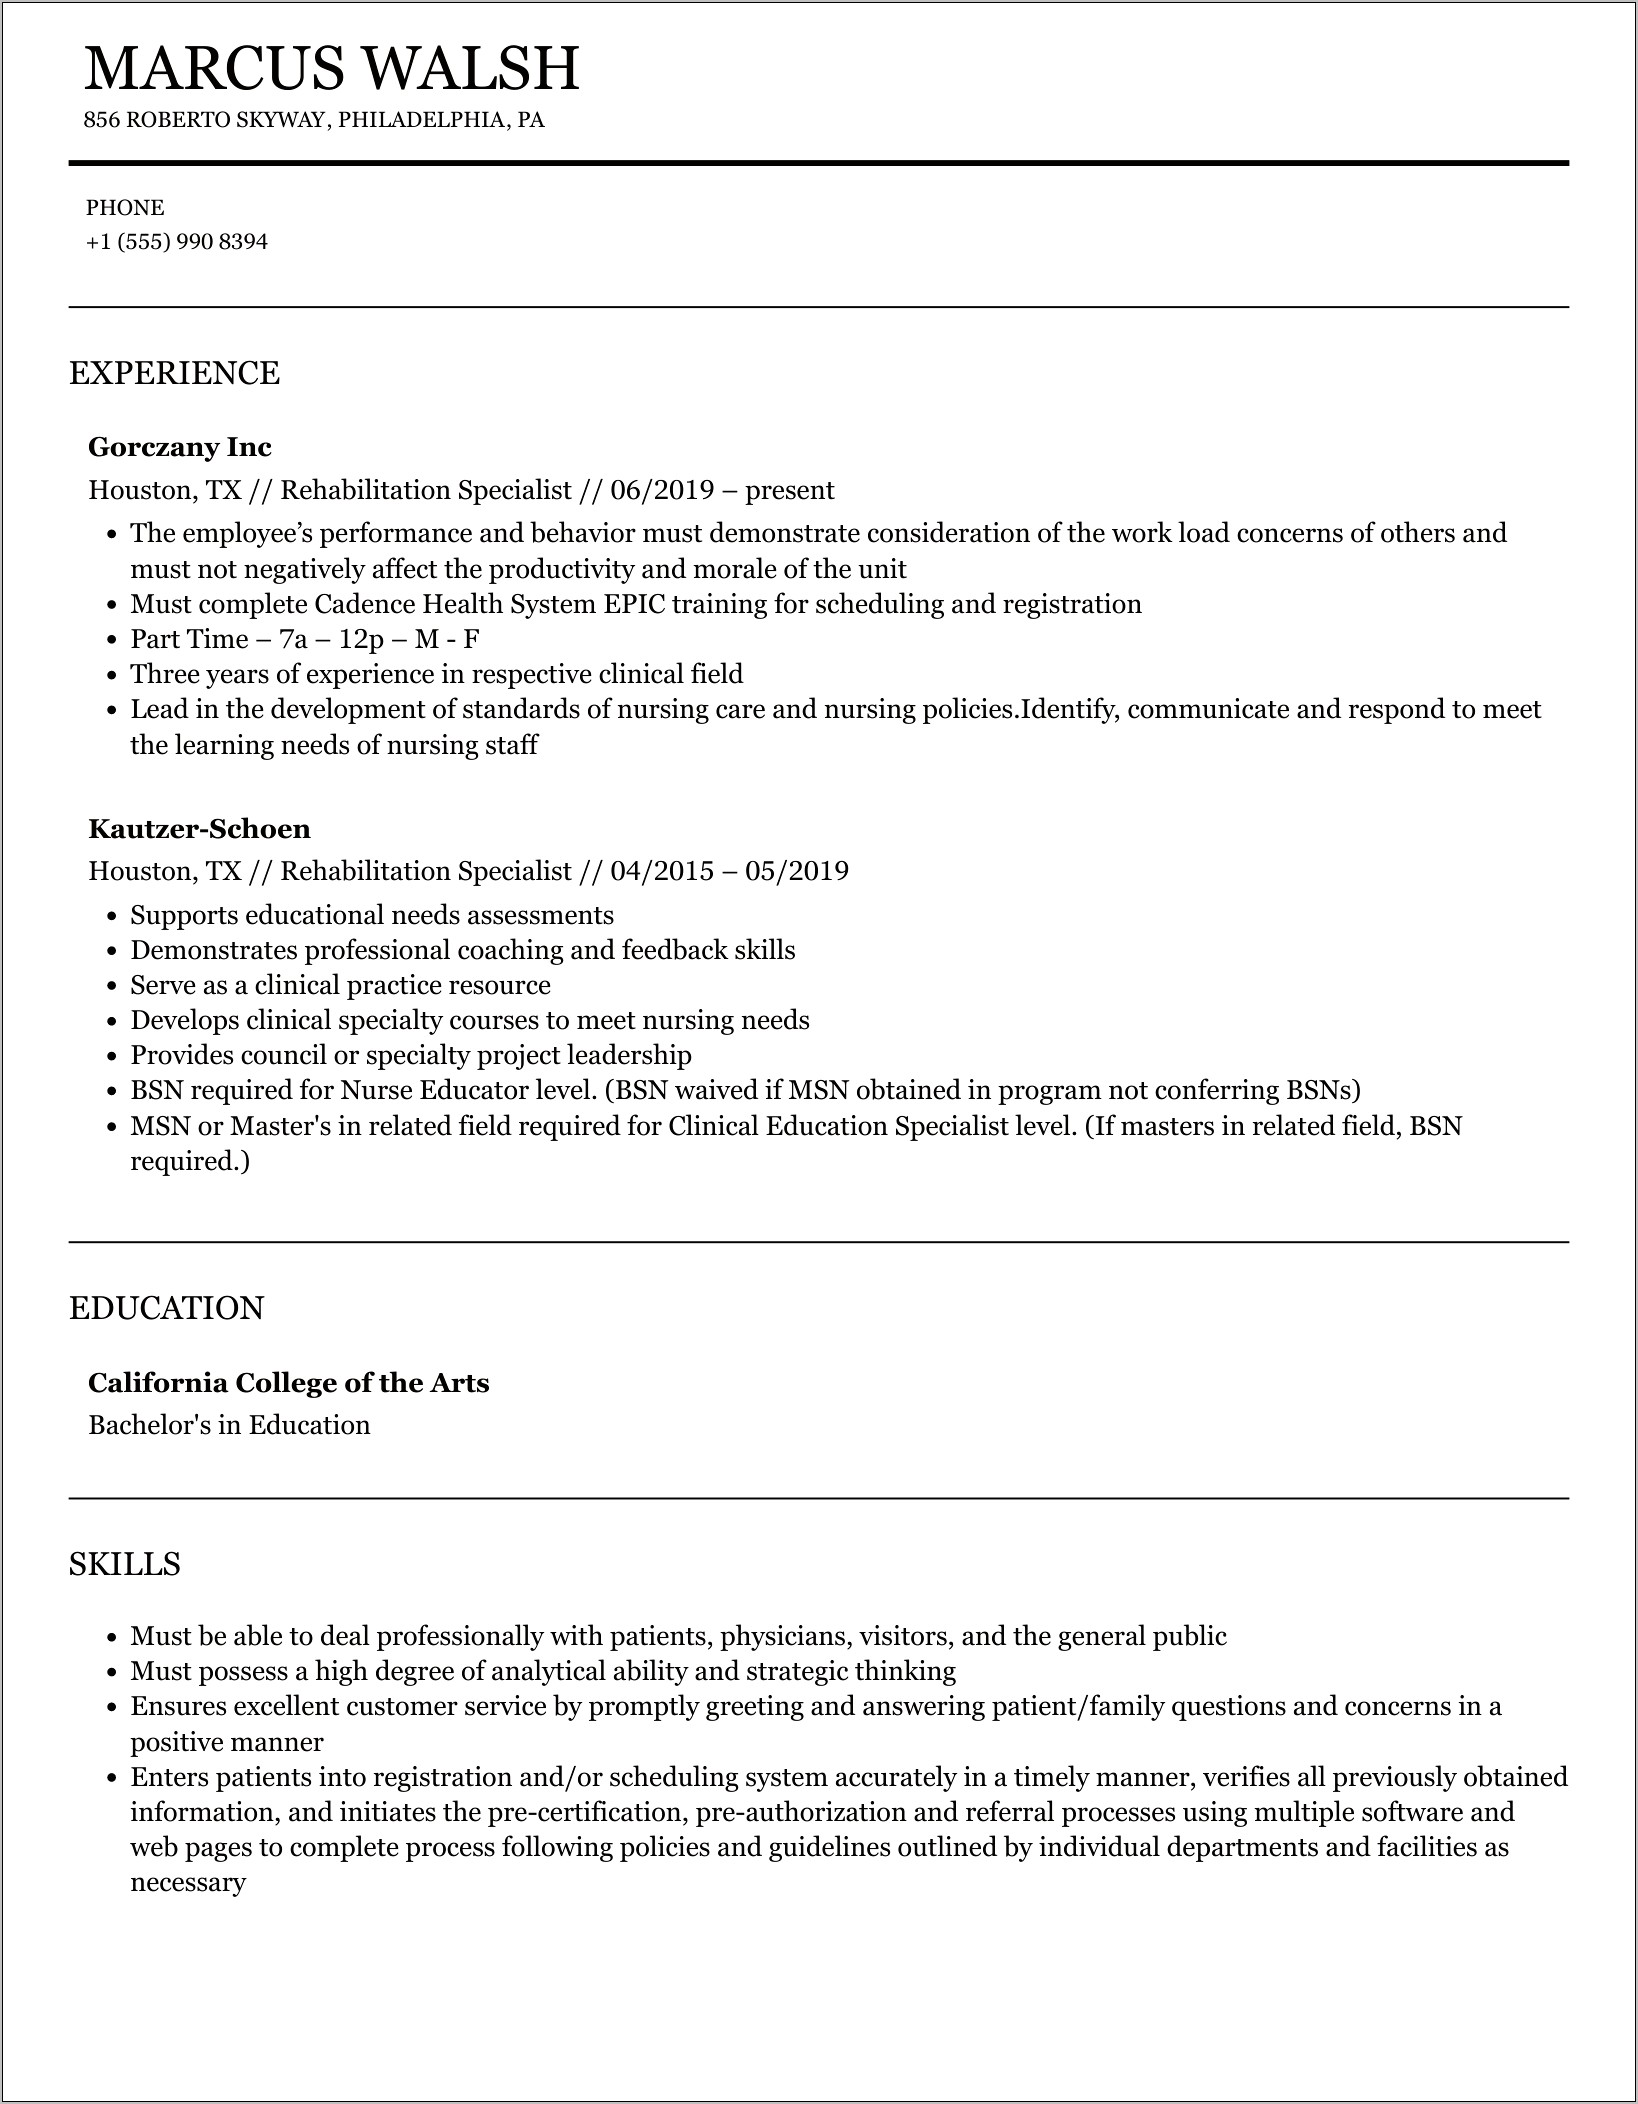 Resume Objective For Rehabilitation Counselor